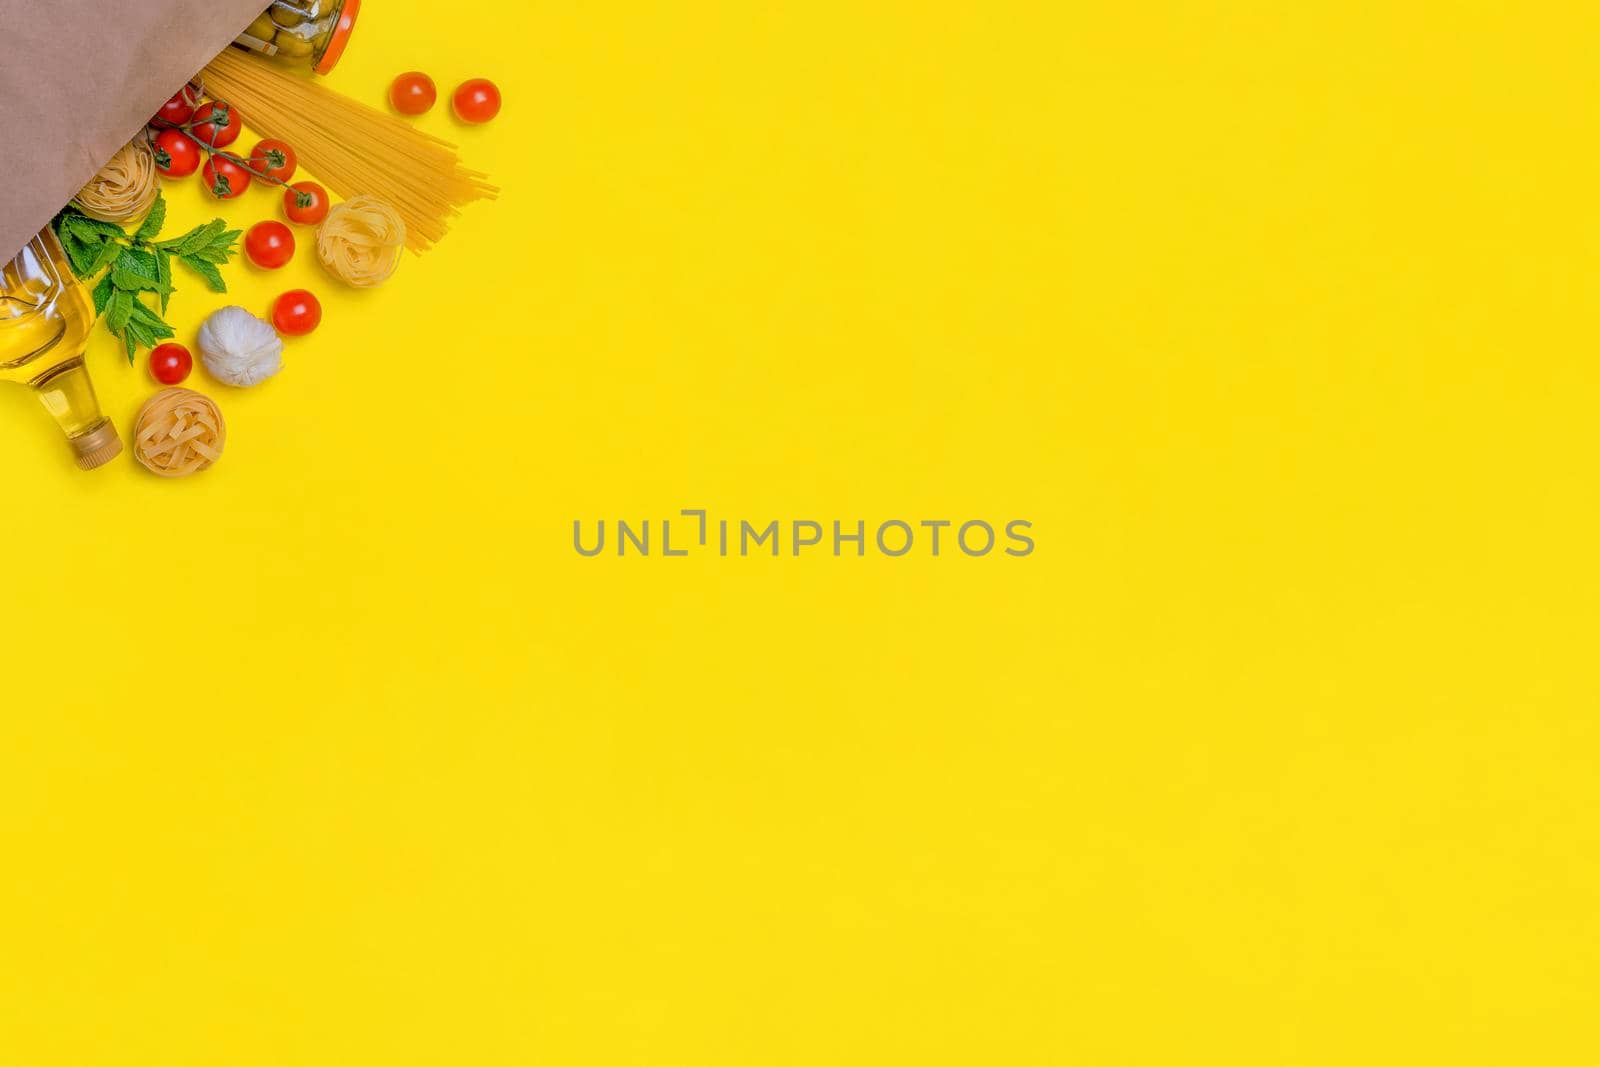 Olive oil, pasta, tagliatelle, olives, egg, cherry tomatoes, garlic in a paper bag on yellow background by Iryna_Melnyk